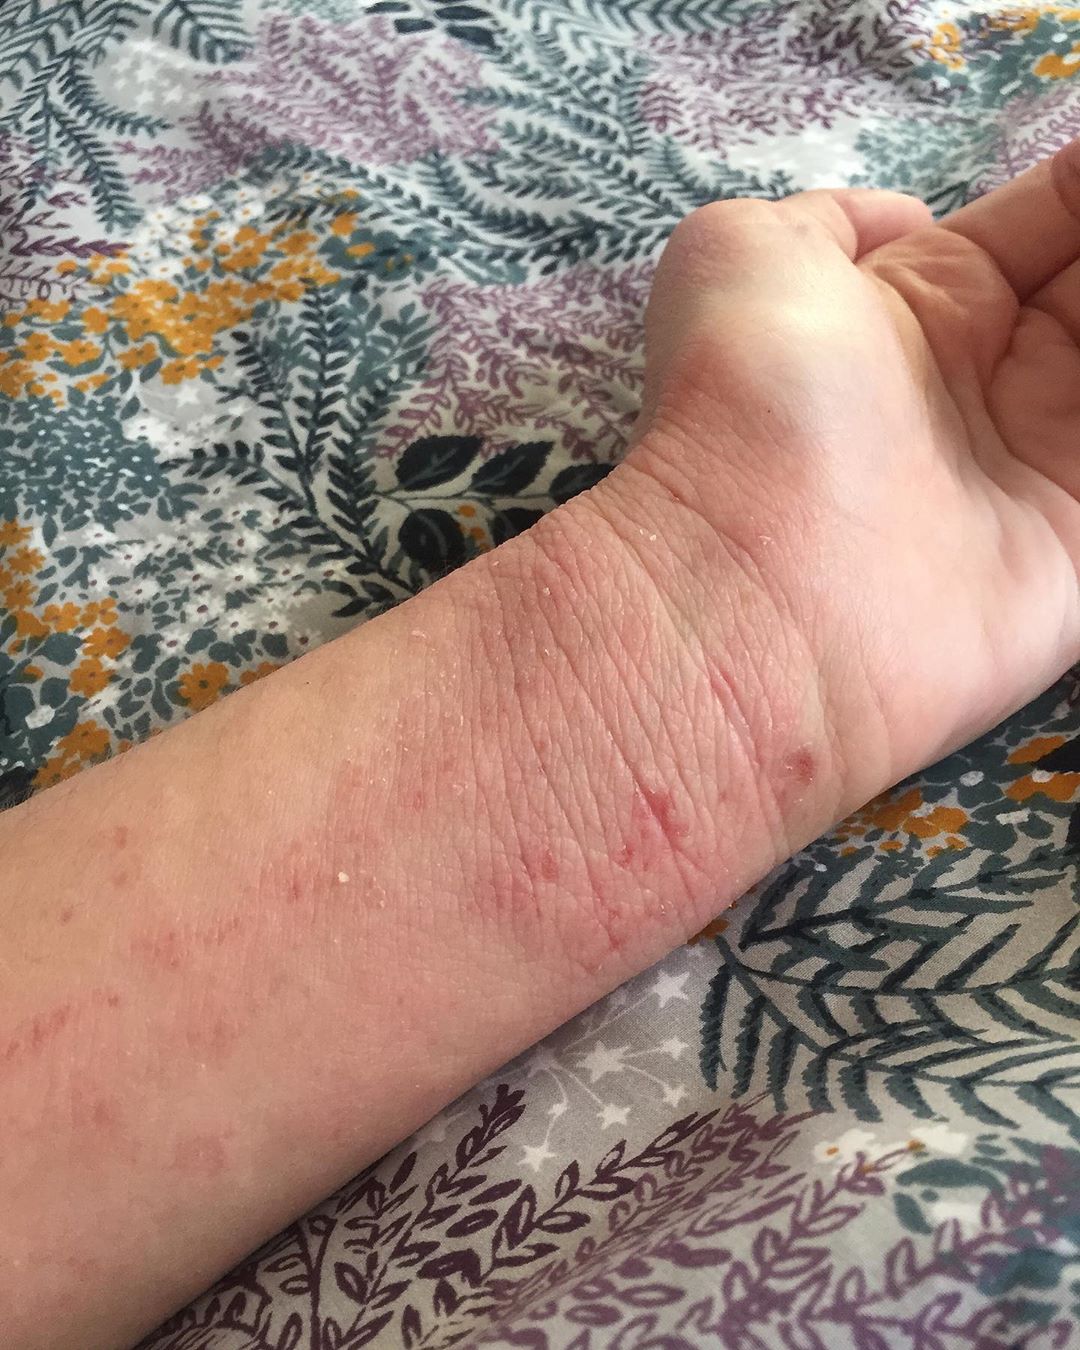 An interview about living with eczema. We chat skin positivity, eczema in the media, and the impact of skin conditions on mental health. Amara shares her eczema tips and advice. #talontedlex #eczematips #eczemaadvice